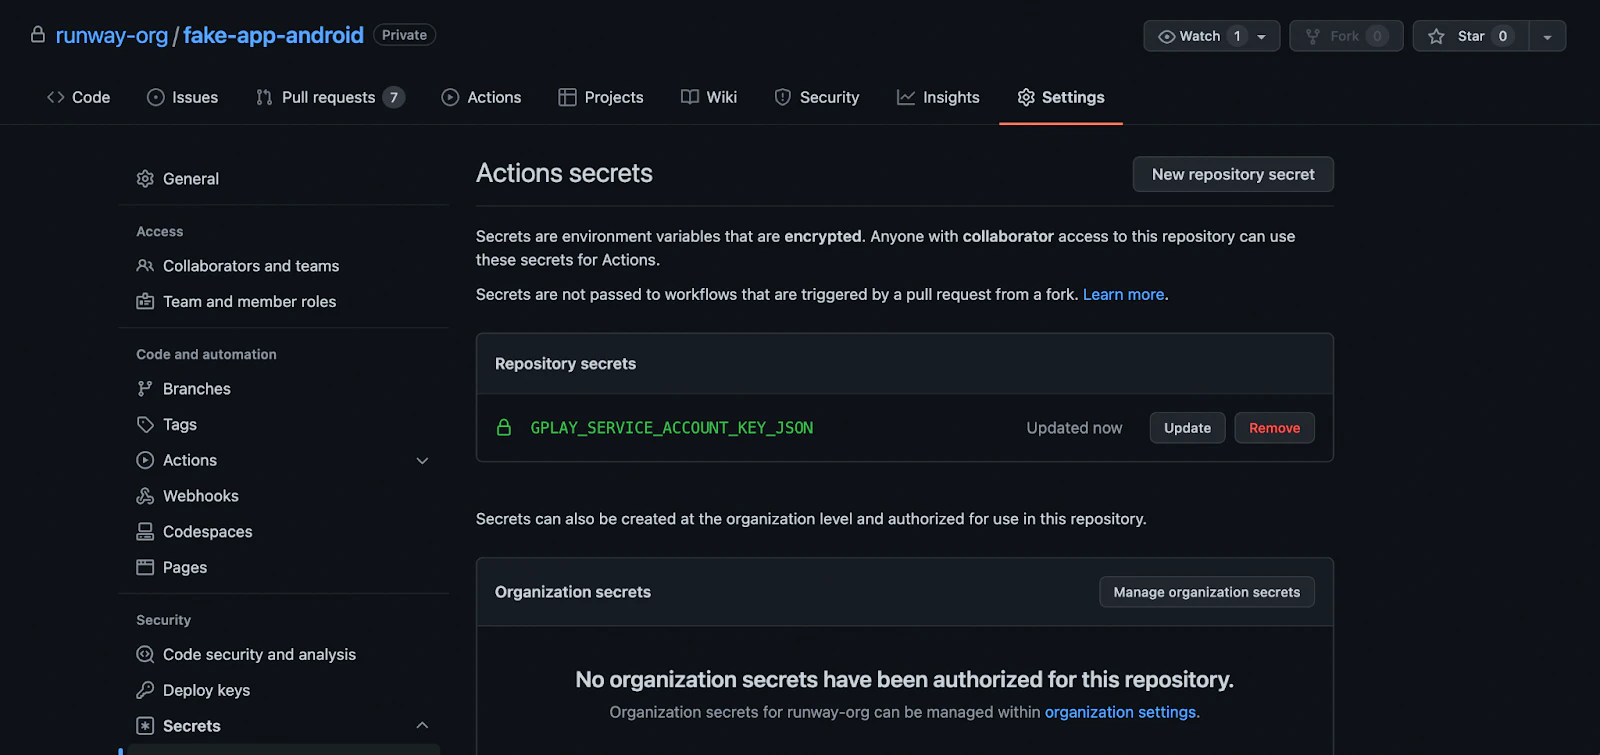 New secret added successfully in GitHub